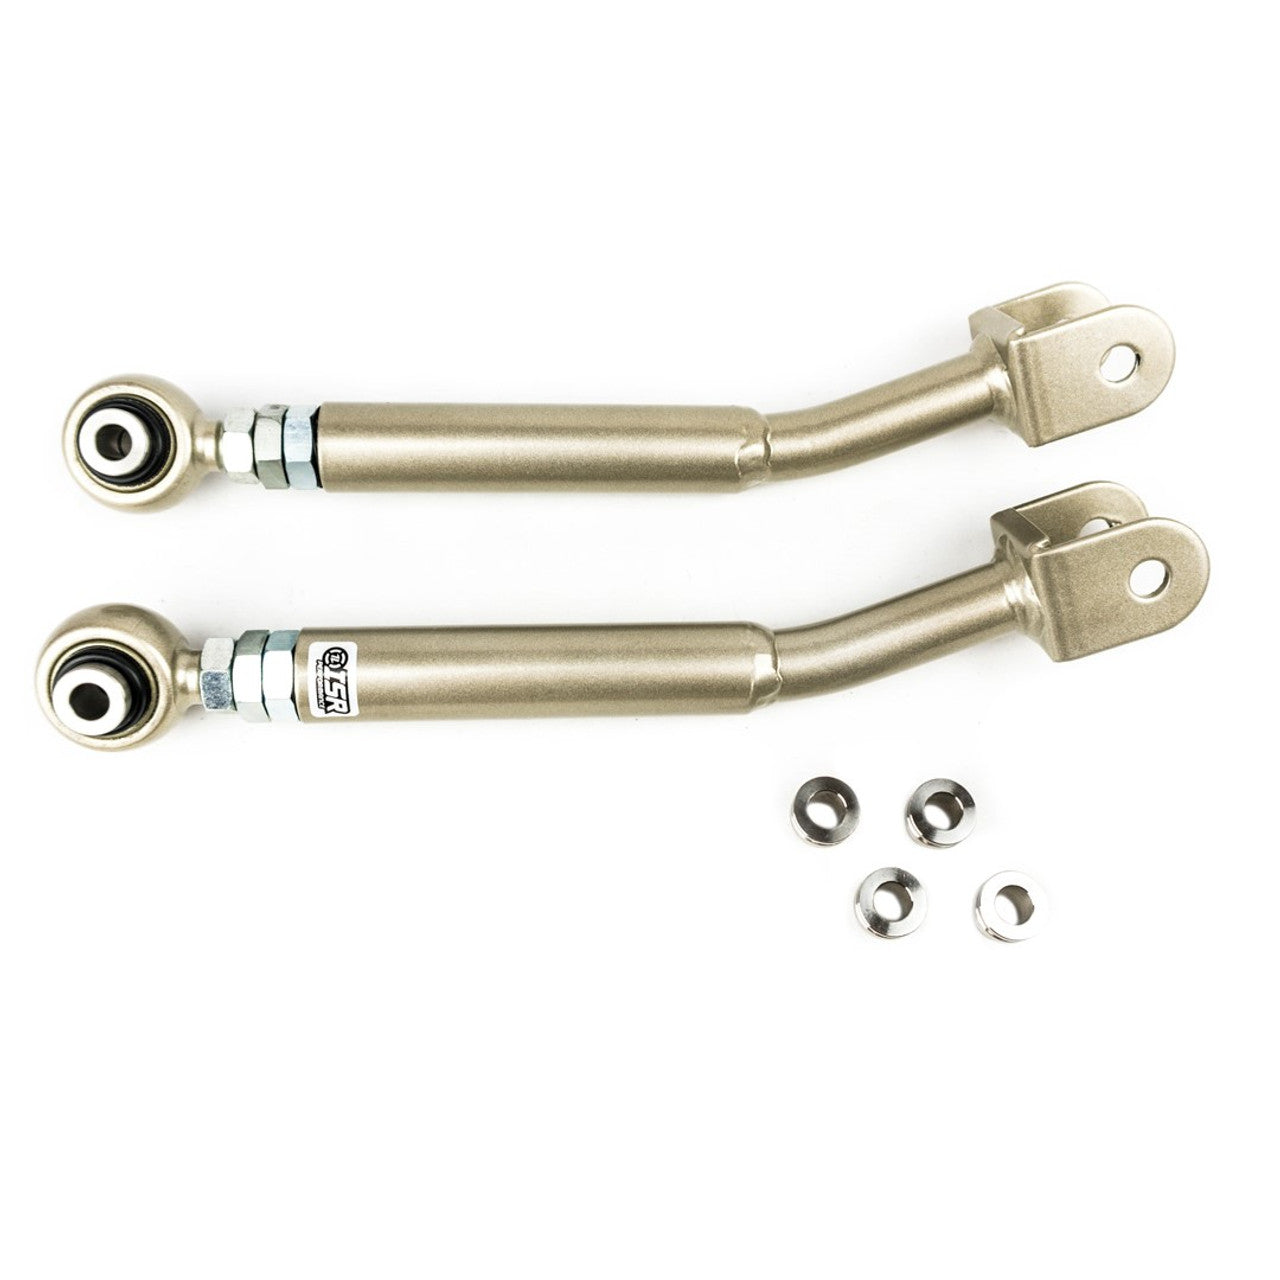 ISR Performance - Rear Toe Control Rods - Nissan 240sx 89-98 - Pro Version - Angled (IS-RTC-NS134-PRO-A)